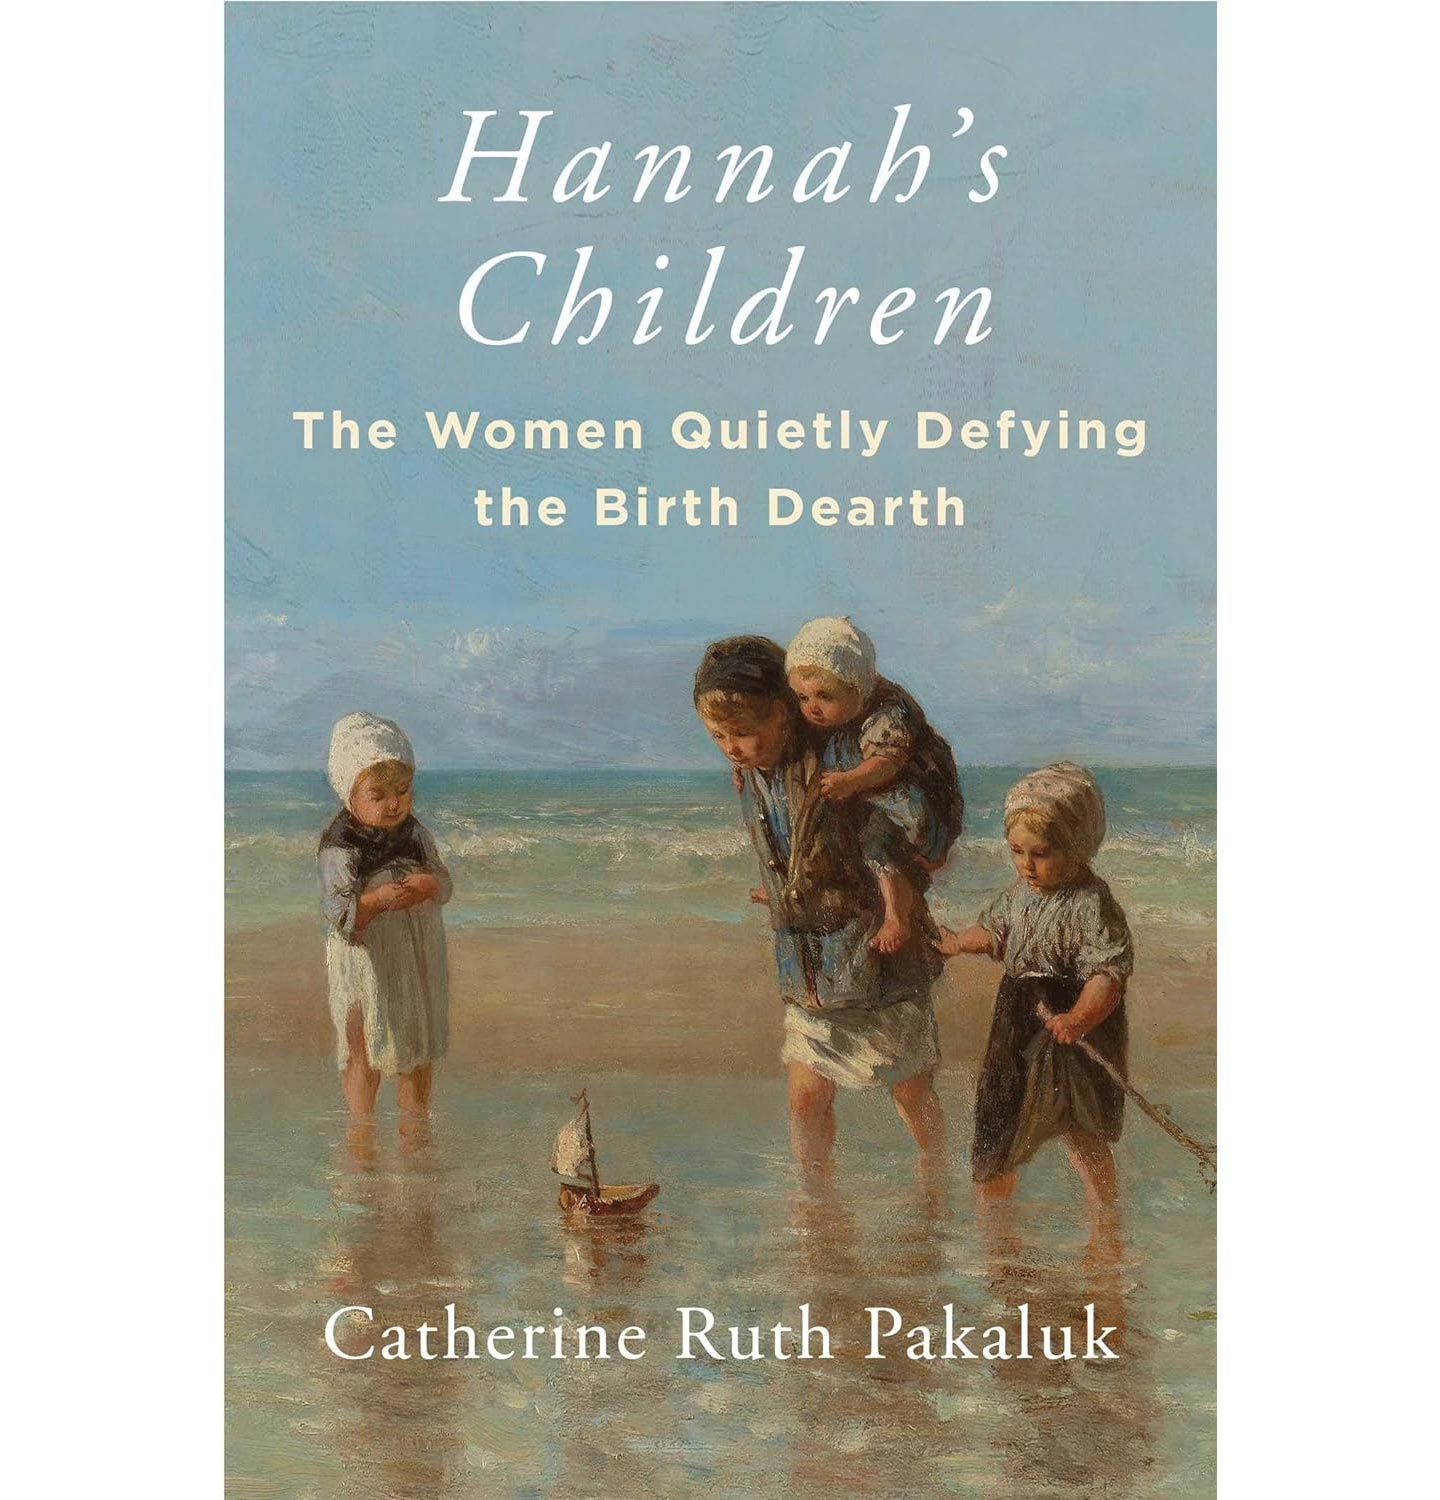 The cover of Hannah's Children.